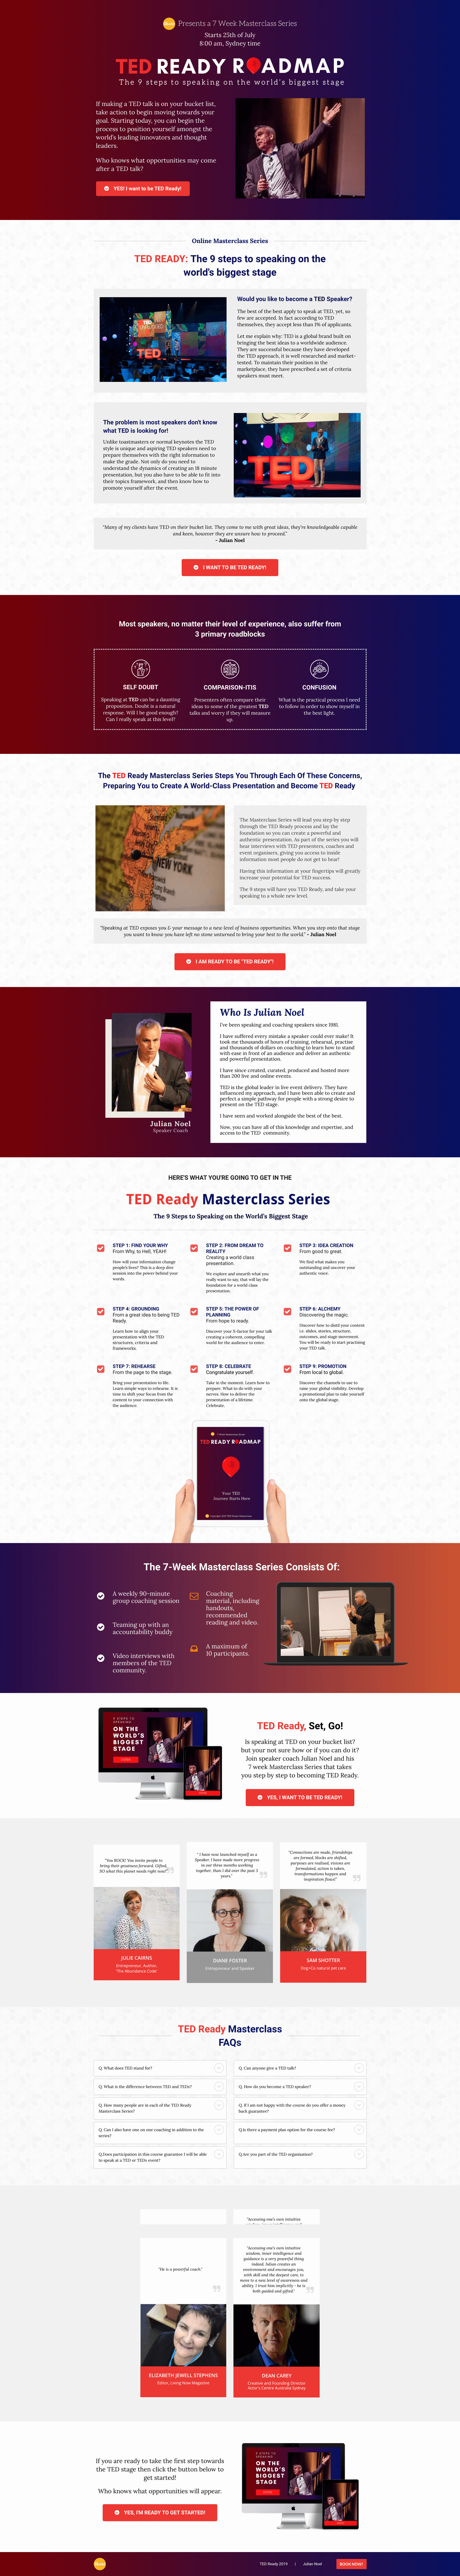 Kartra Landing page for TED Talk